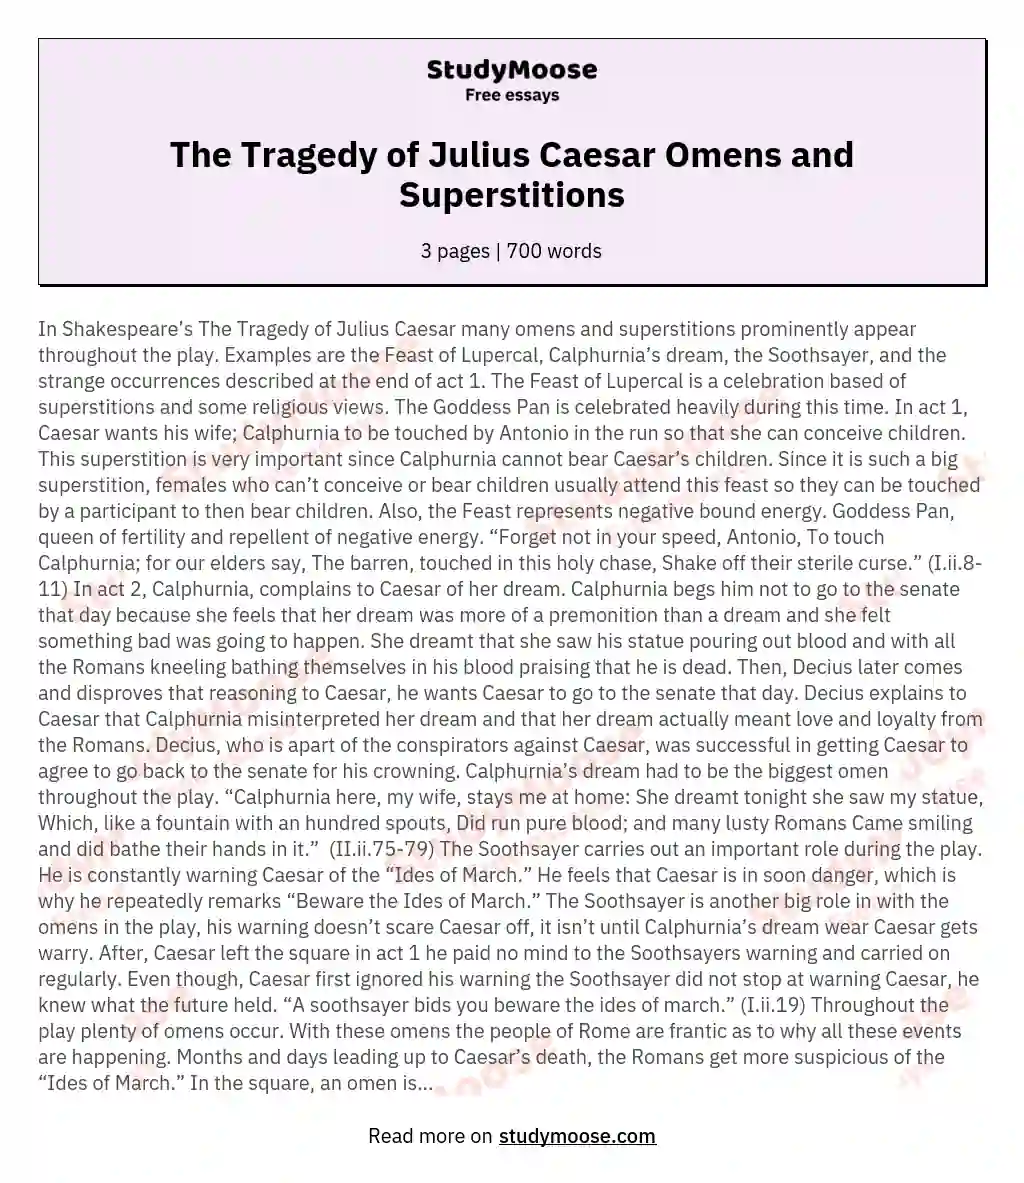 The Tragedy of Julius Caesar Omens and Superstitions essay